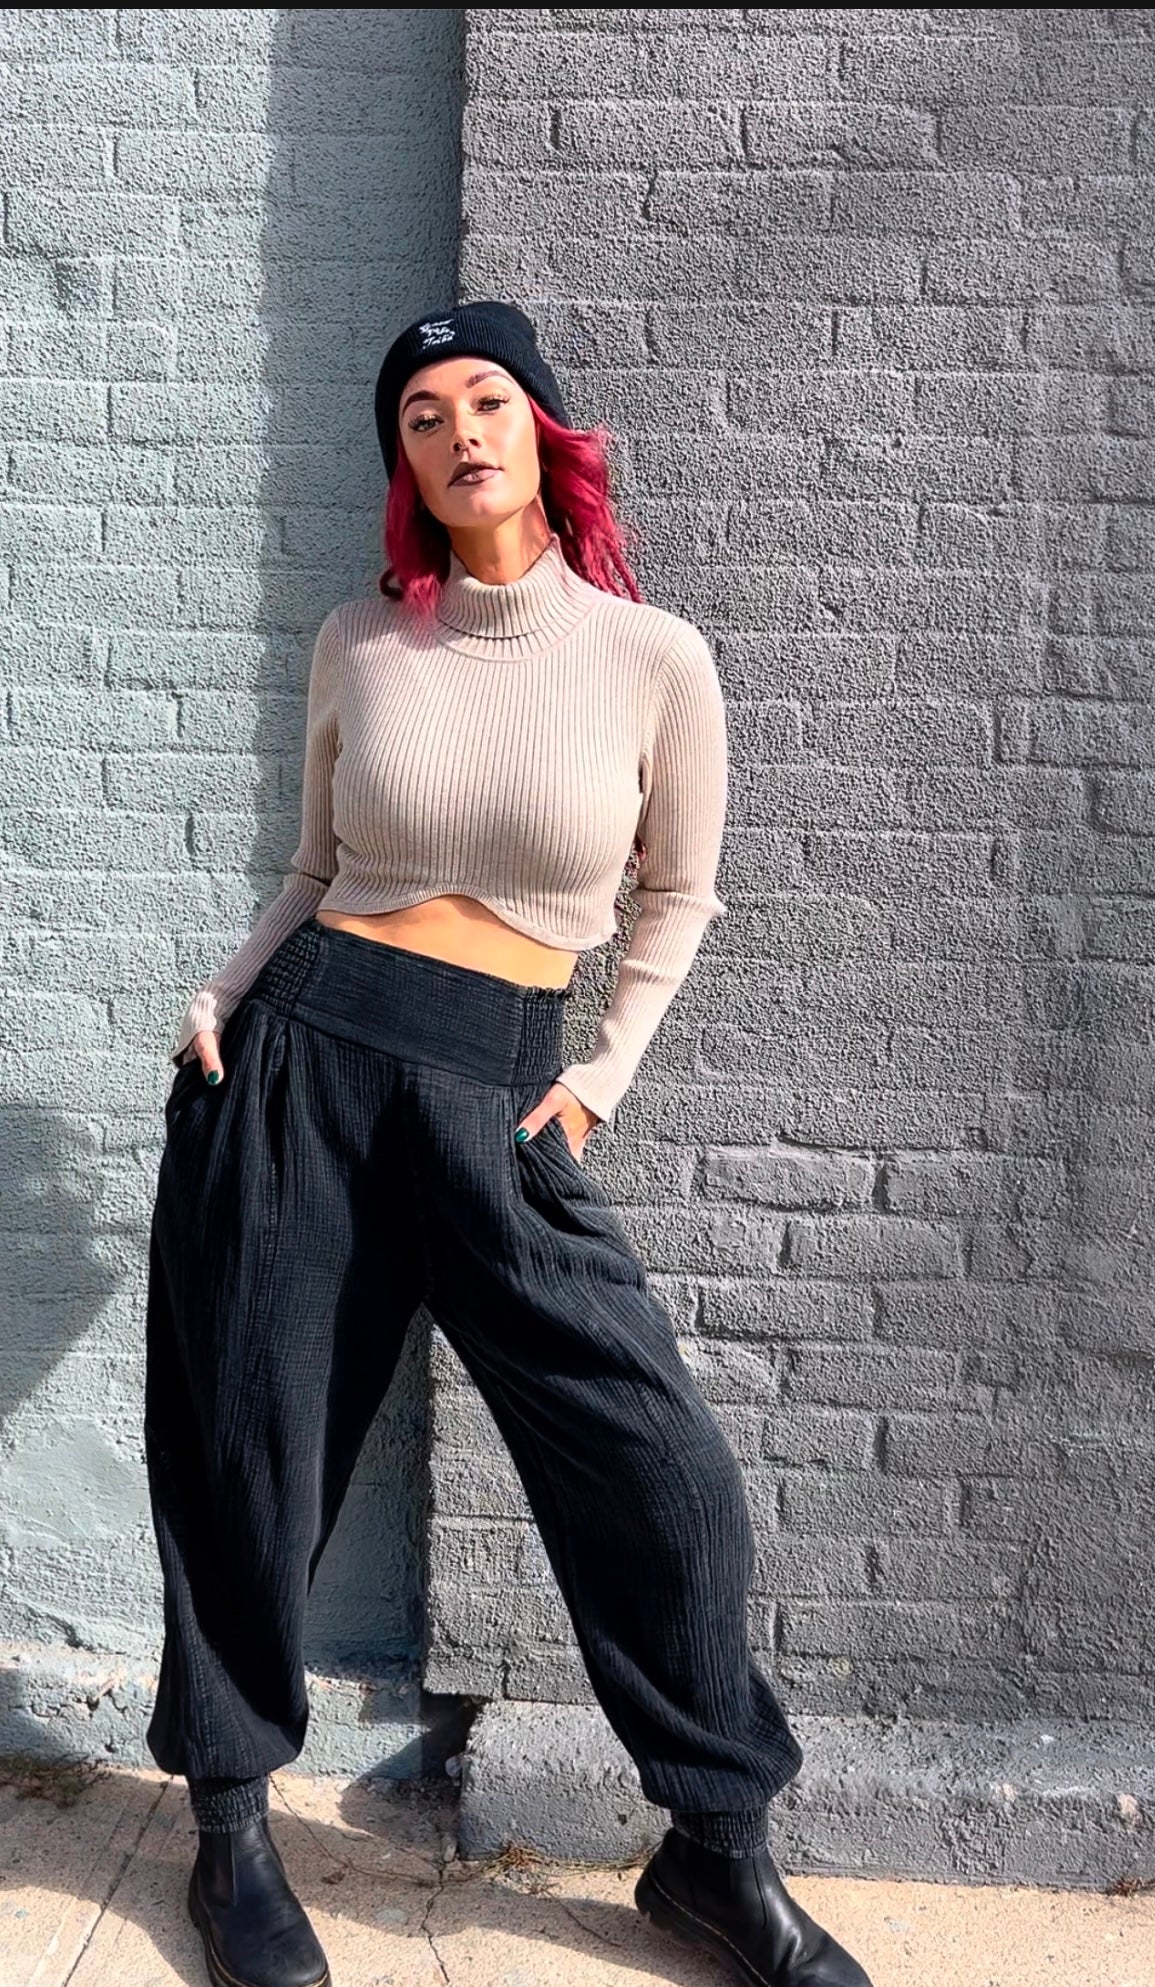 Be Your Own Beautiful Wide Band Pants.